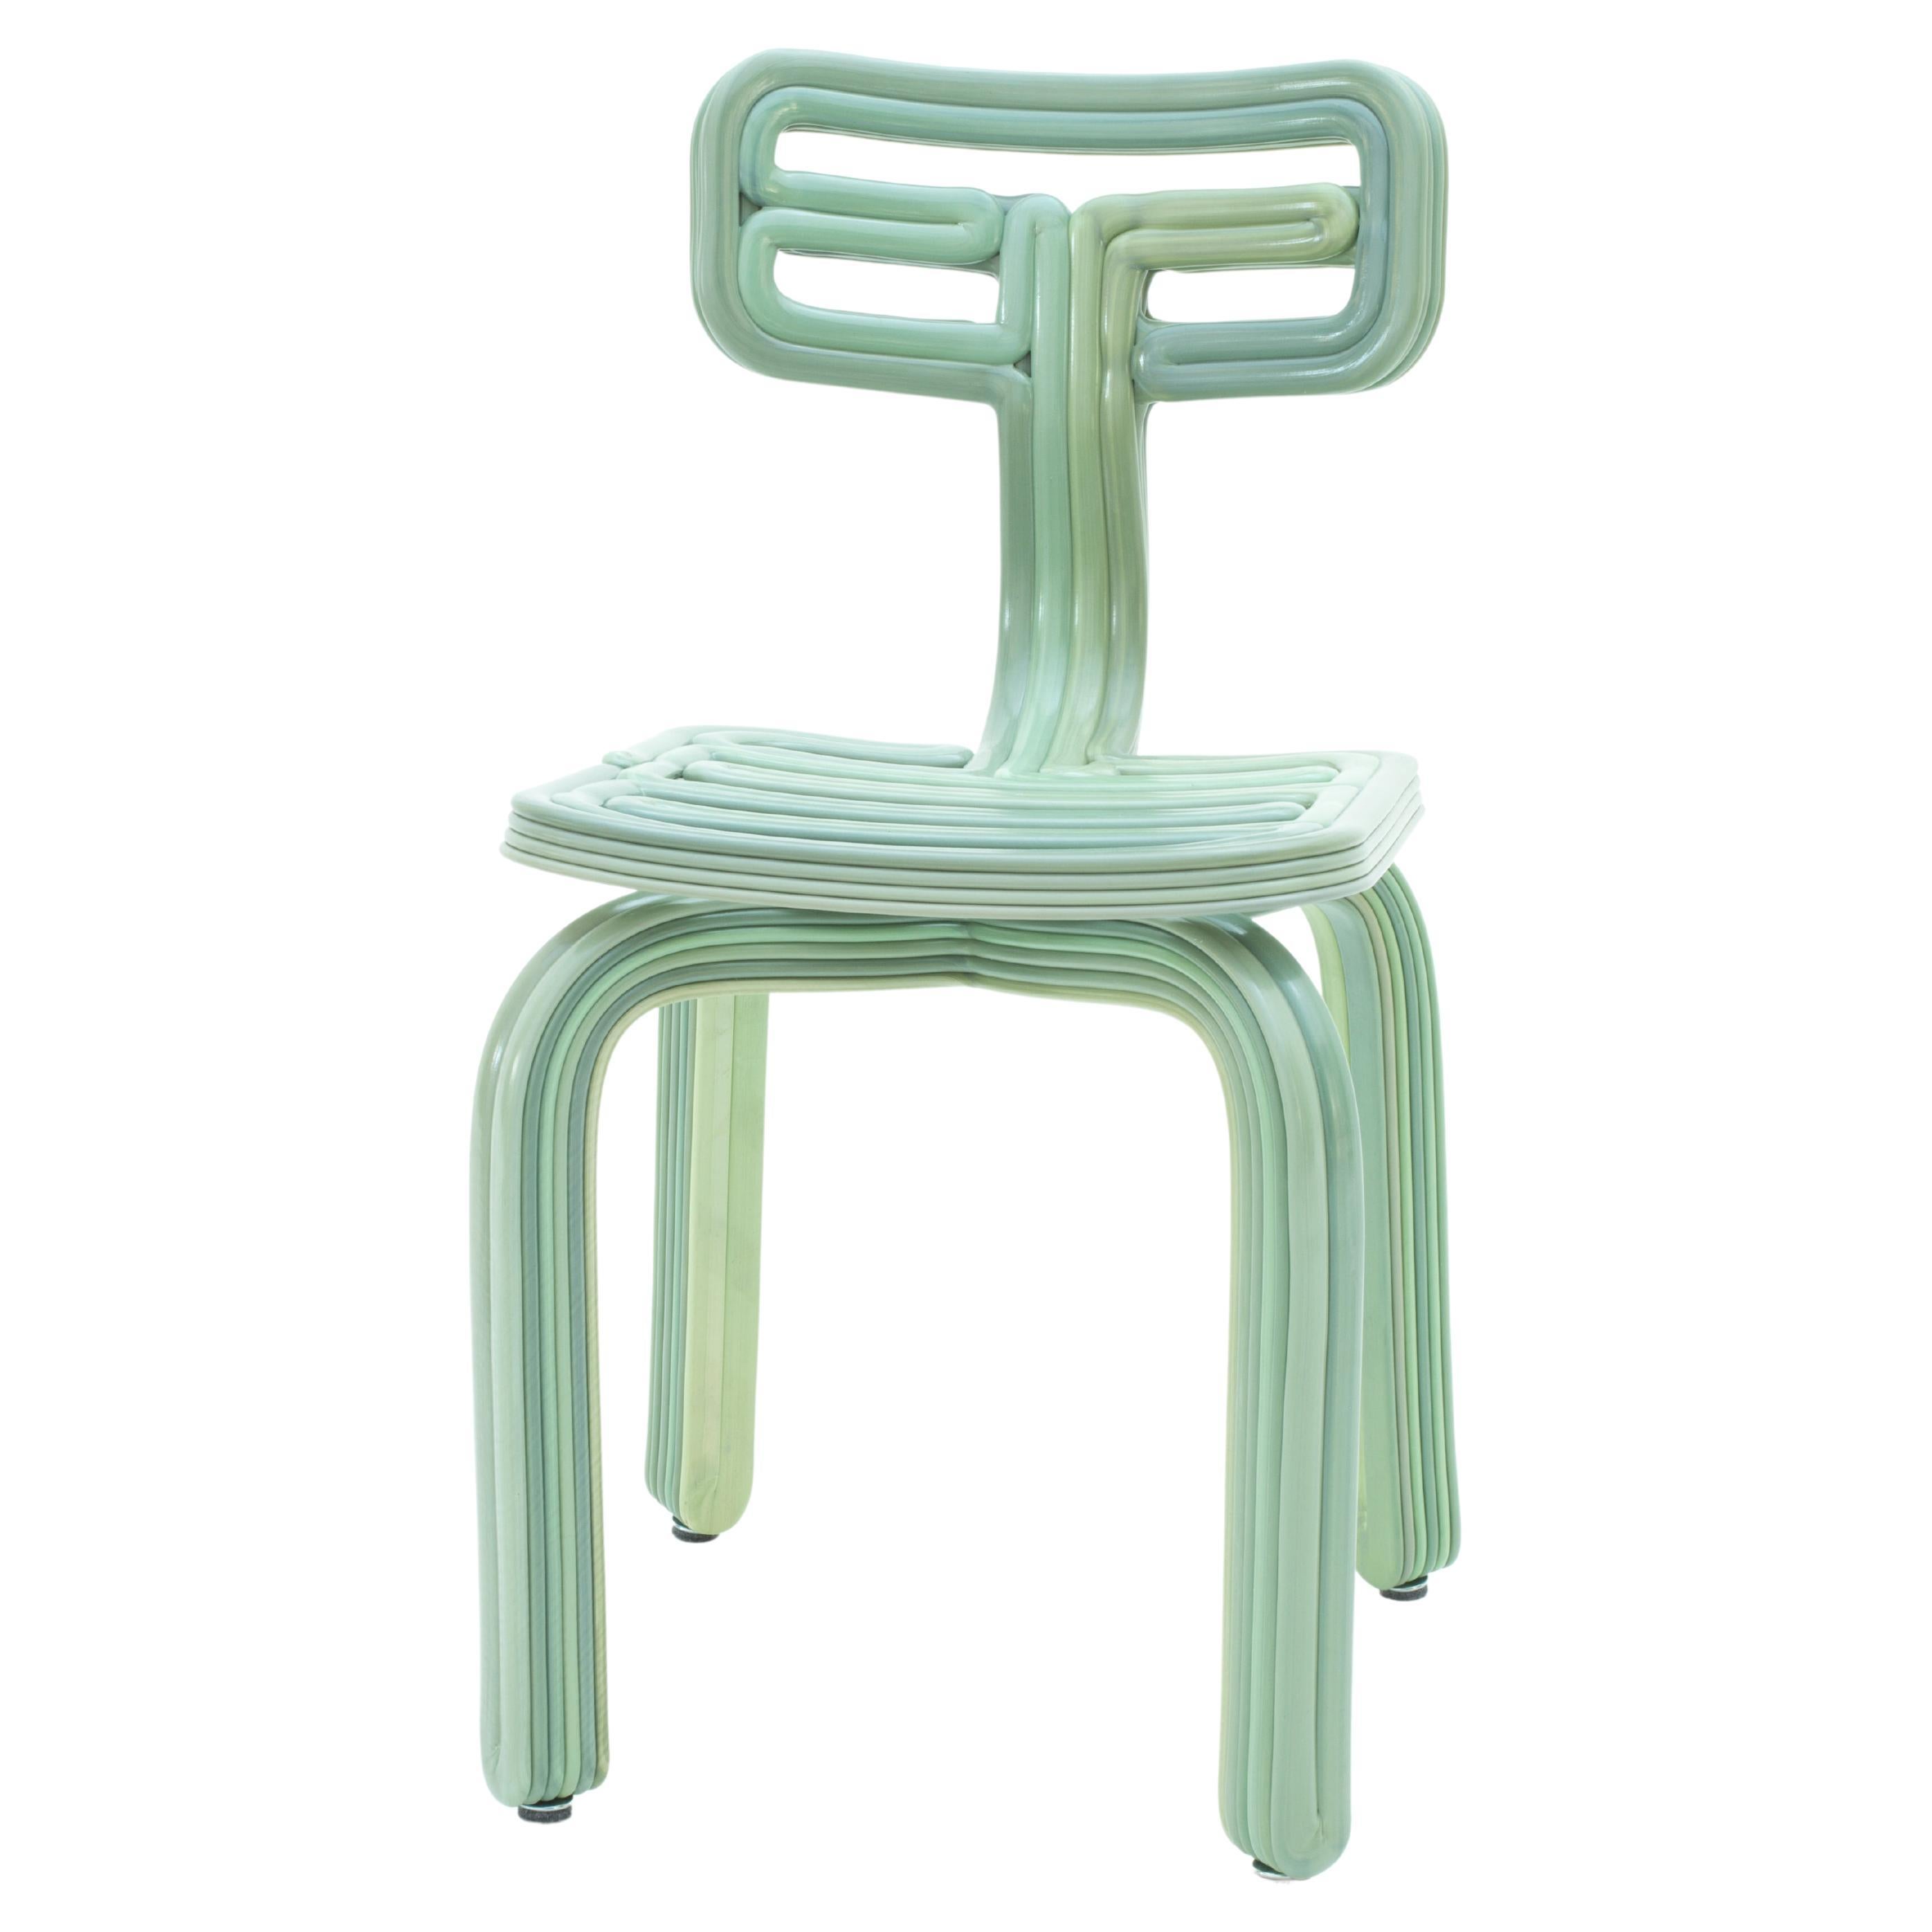 Chubby Chair in Moss 3D Printed Recycled Plastic For Sale